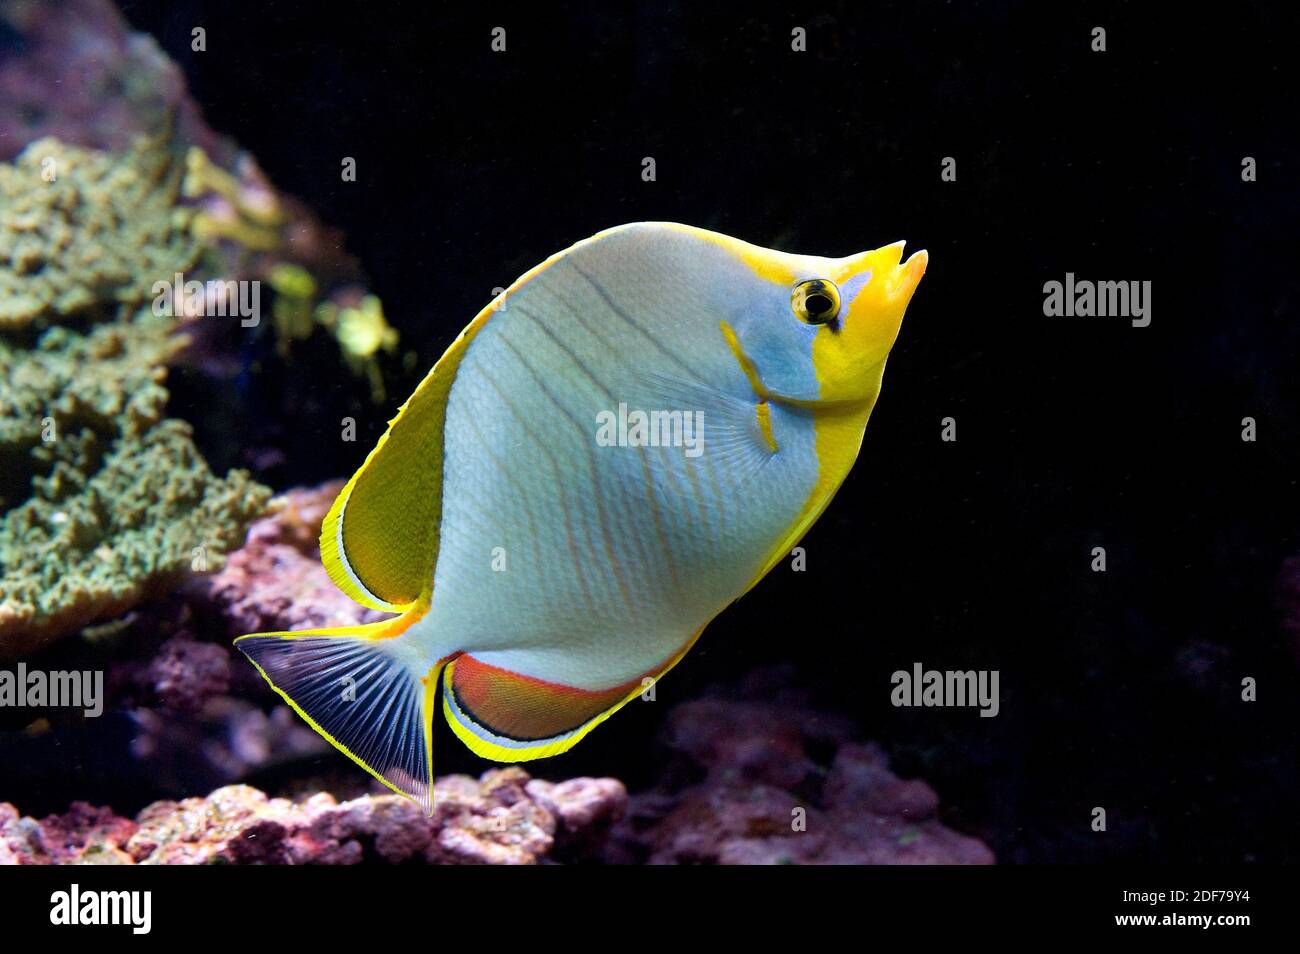 Yellowhead butterflyfish (Chaetodon xanthocephalus) is a marine fish native to tropical Indian Ocean. Stock Photo